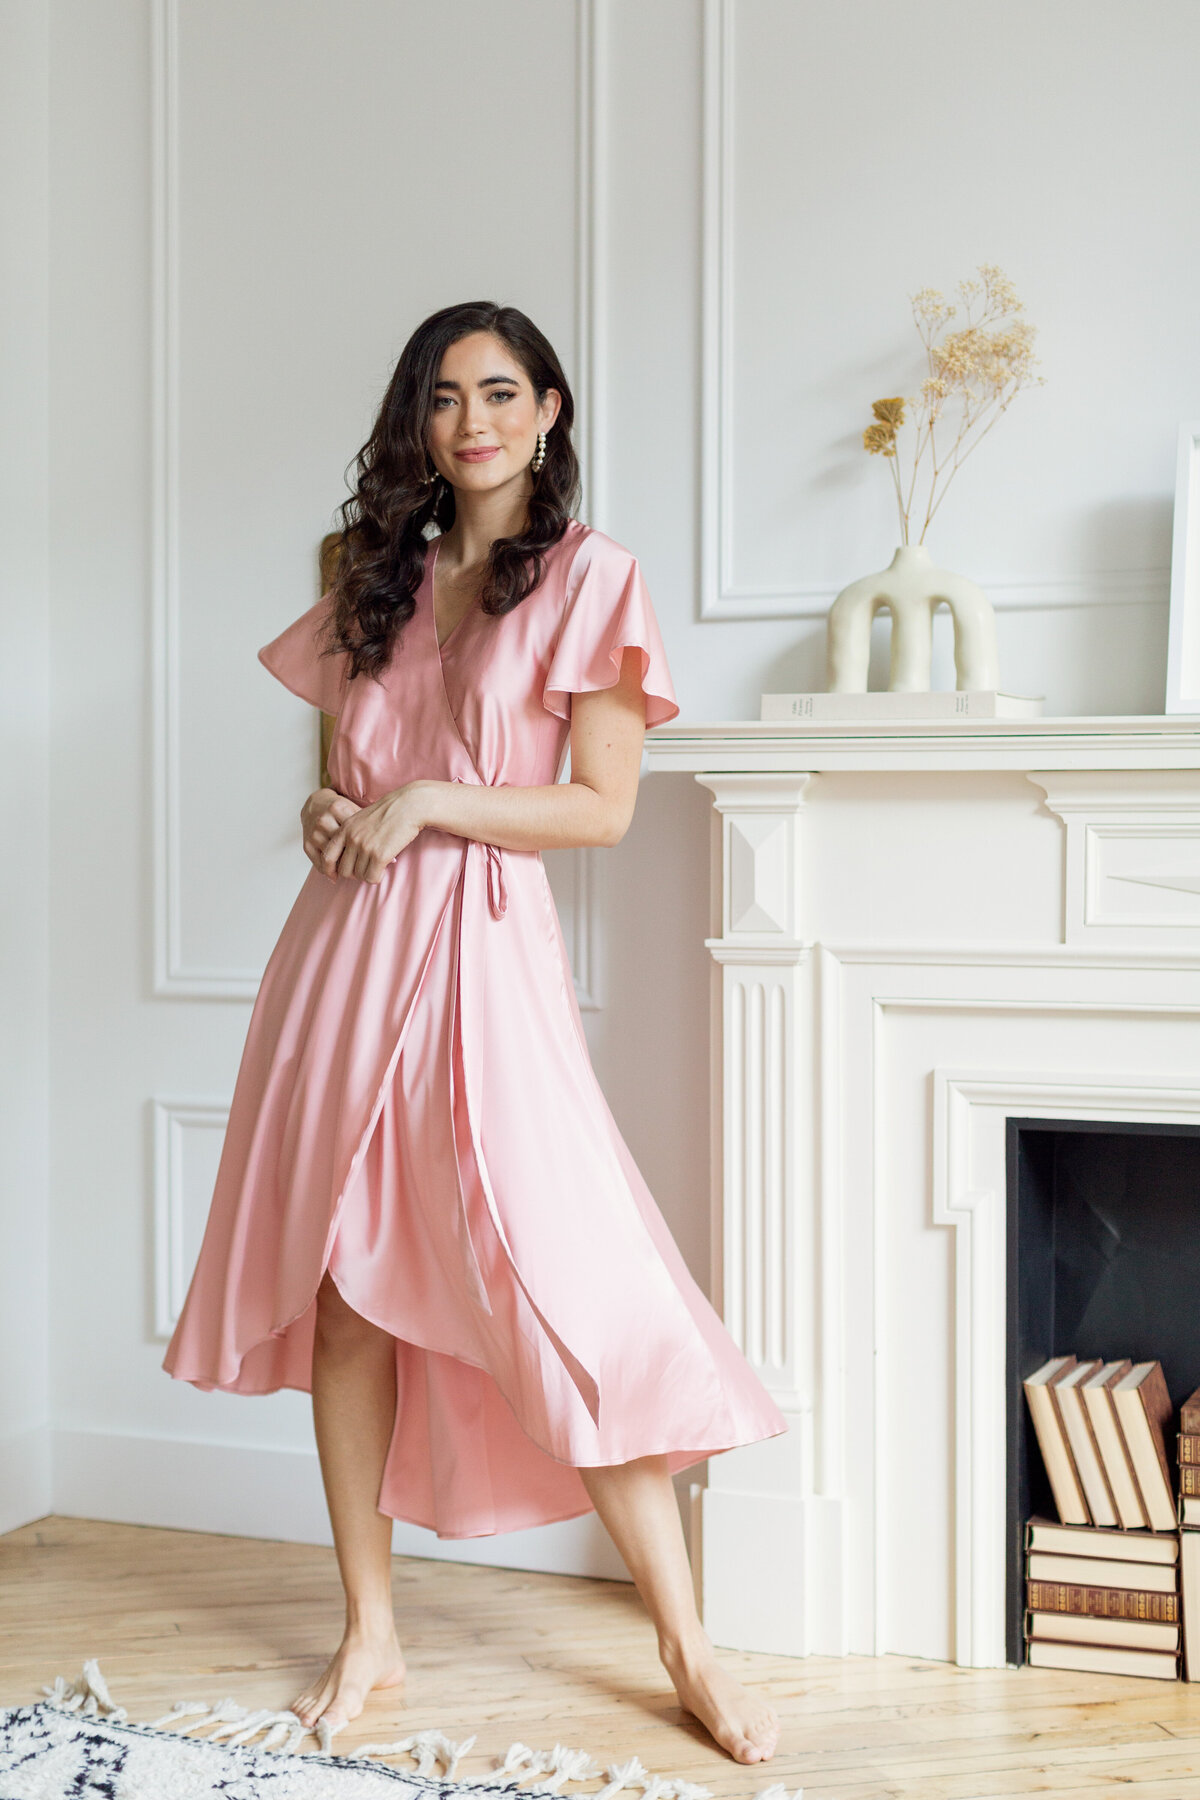 Classic satin wrap style pink bridesmaid dress By Catalfo, elegant wedding fashion based in Kelowna. Featured on the Brontë Bride Vendor Guide.